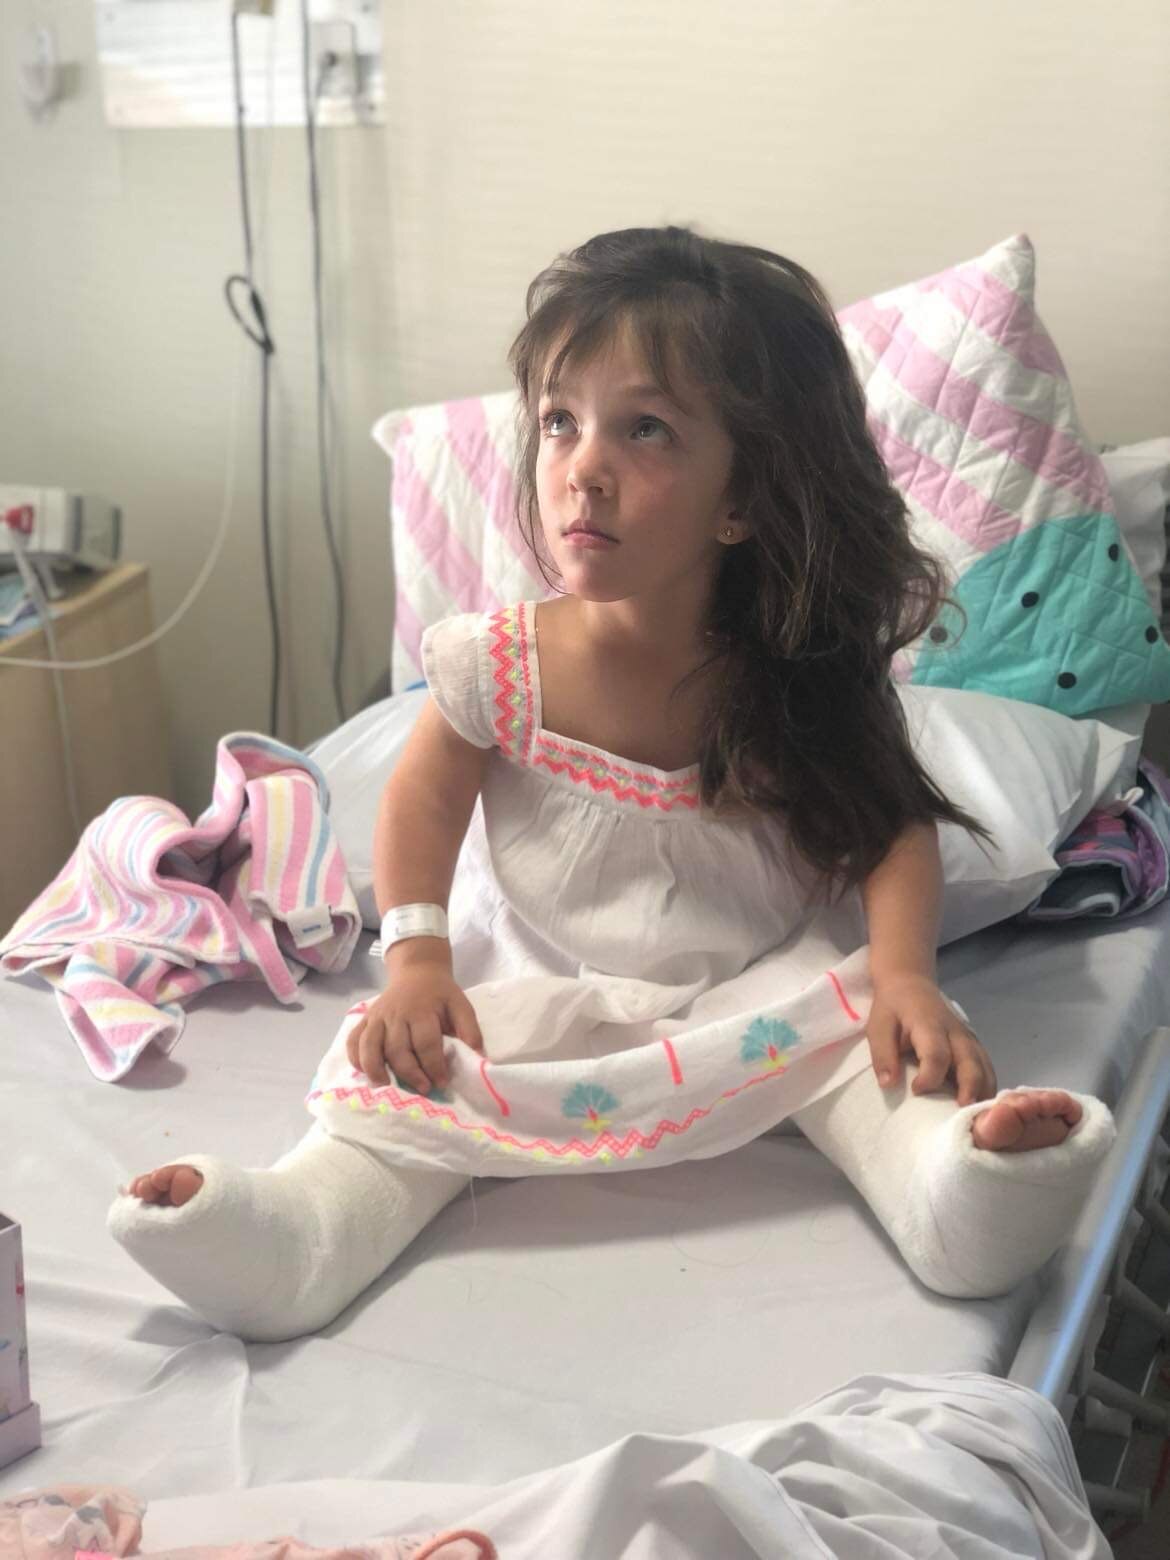 a little girl with dwarfism sits on a hospital bed, both her legs are wrapped in casts and she's wearing a pink and white dress